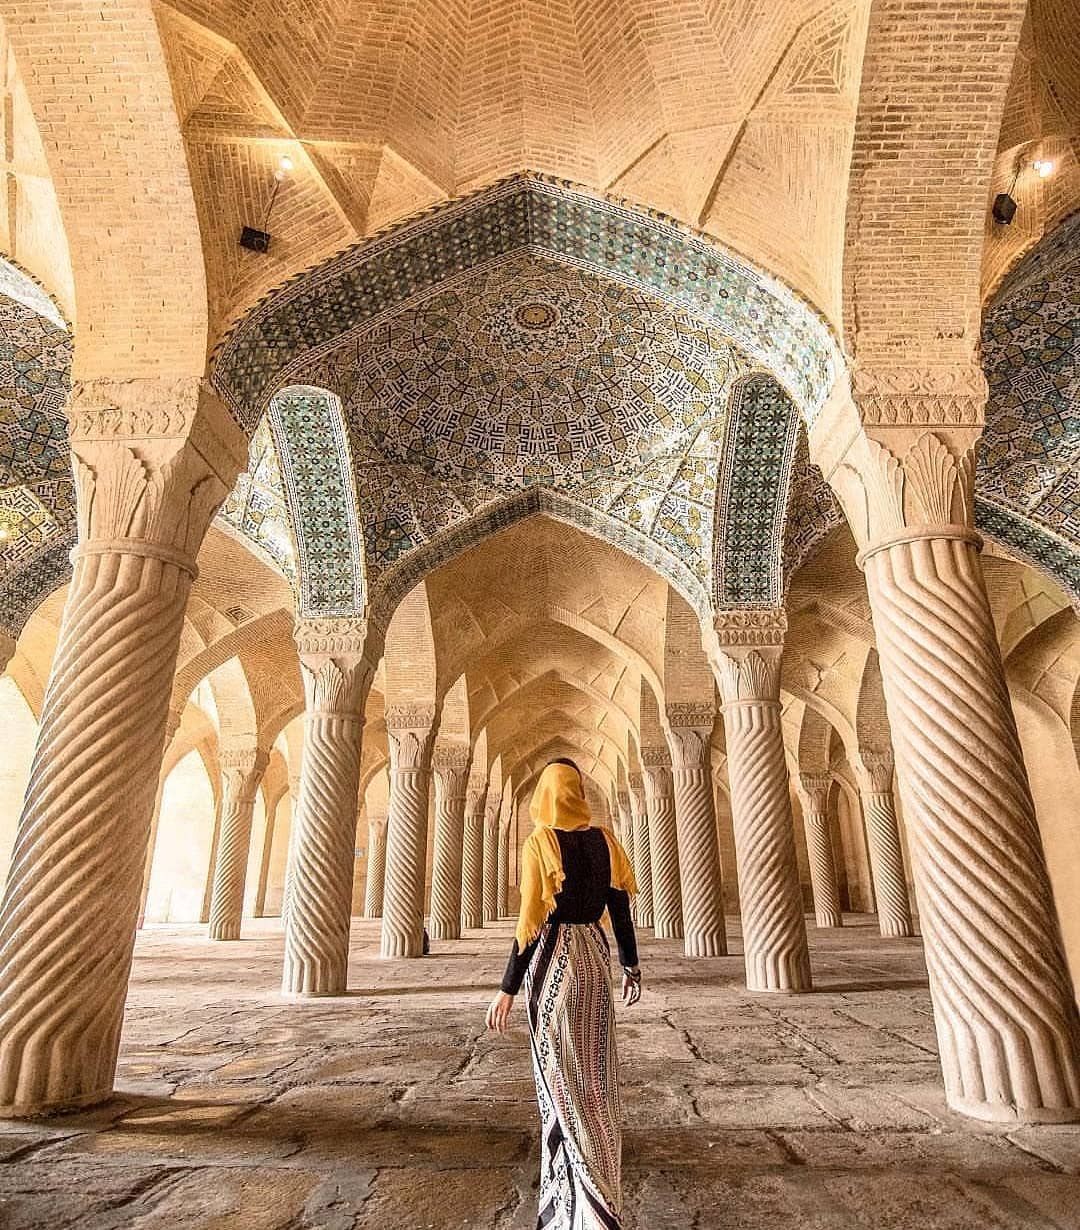 Vakil mosque - beautiful mosques in Iran